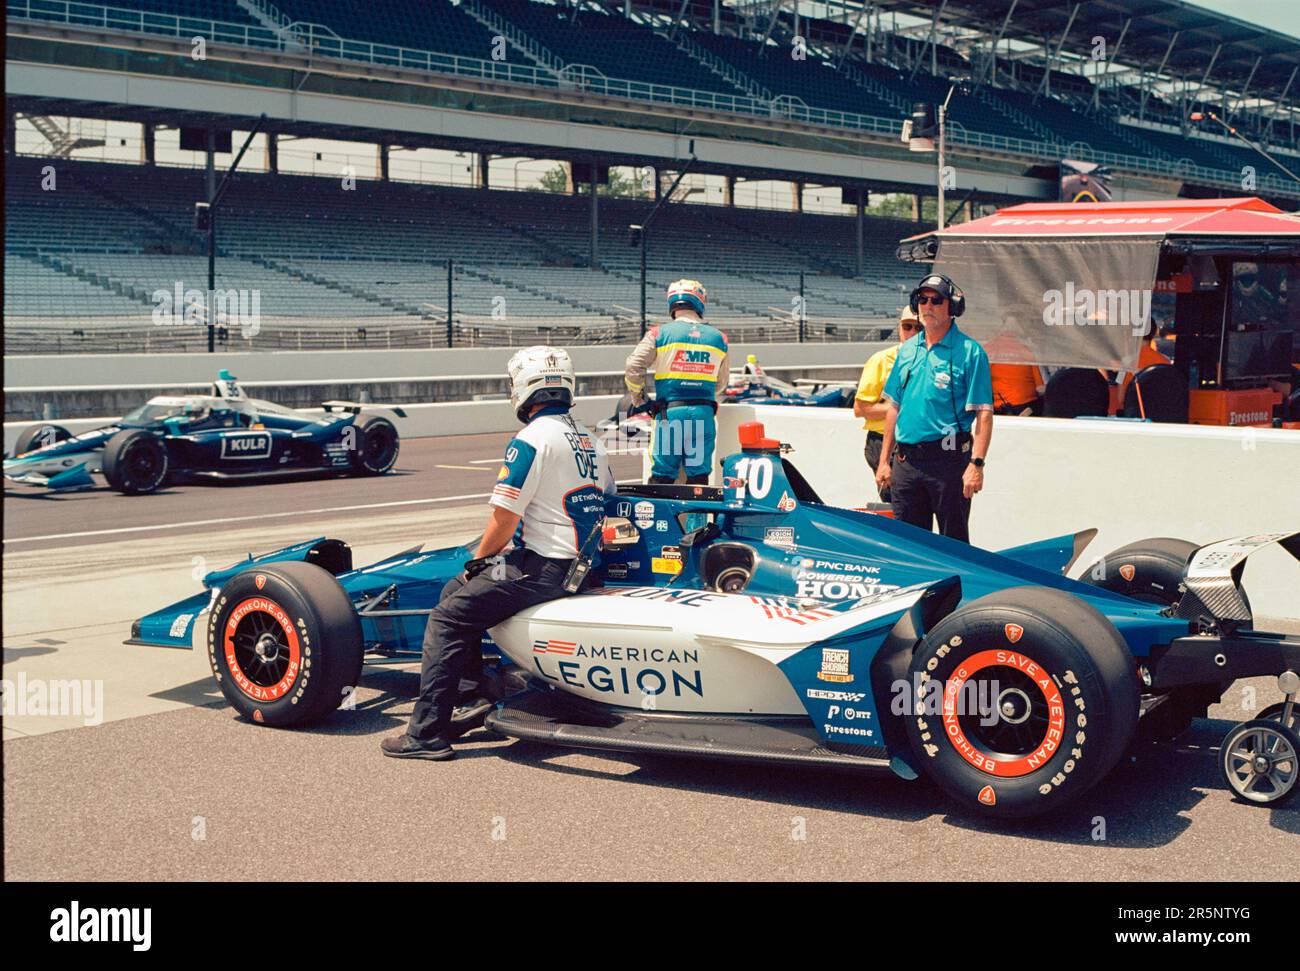 INDIANAPOLIS, INDIANA, UNITED STATES - 2023/05/22: Crews members for Chip Ganassi Racing driver Álex Palou (10) of Spain push his car to pit row during practice for the 2023 Indy 500 at Indianapolis Motor Speedway in Indianapolis. (Photo by Jeremy Hogan/The Bloomingtonian) Stock Photo